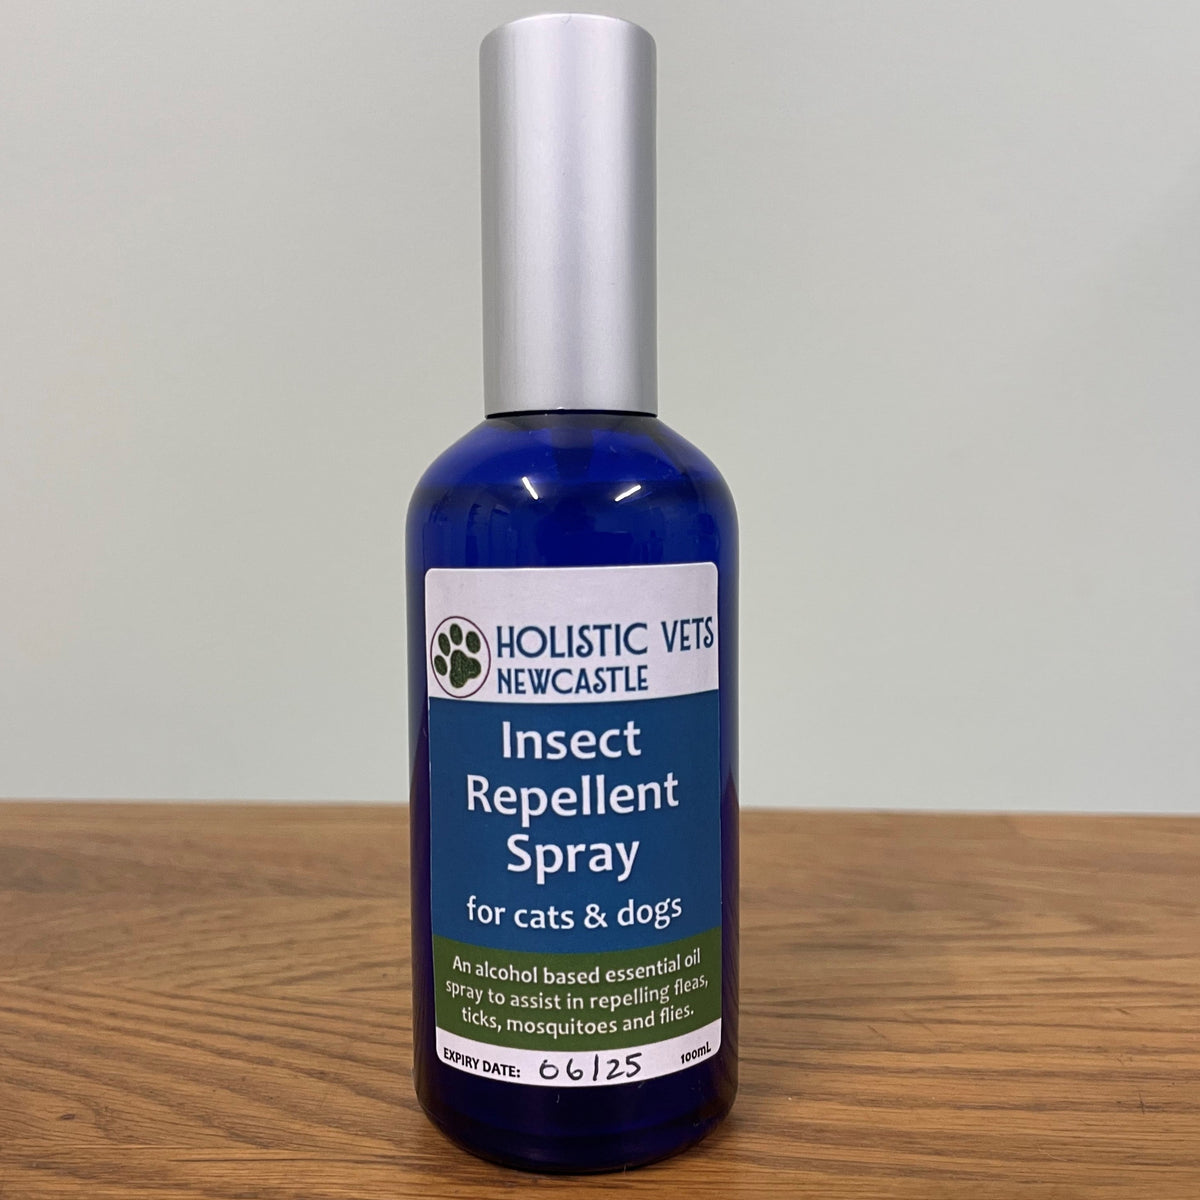 Holistic Vets Own Insect Repellent Spray for Cats and Dogs (100ml)